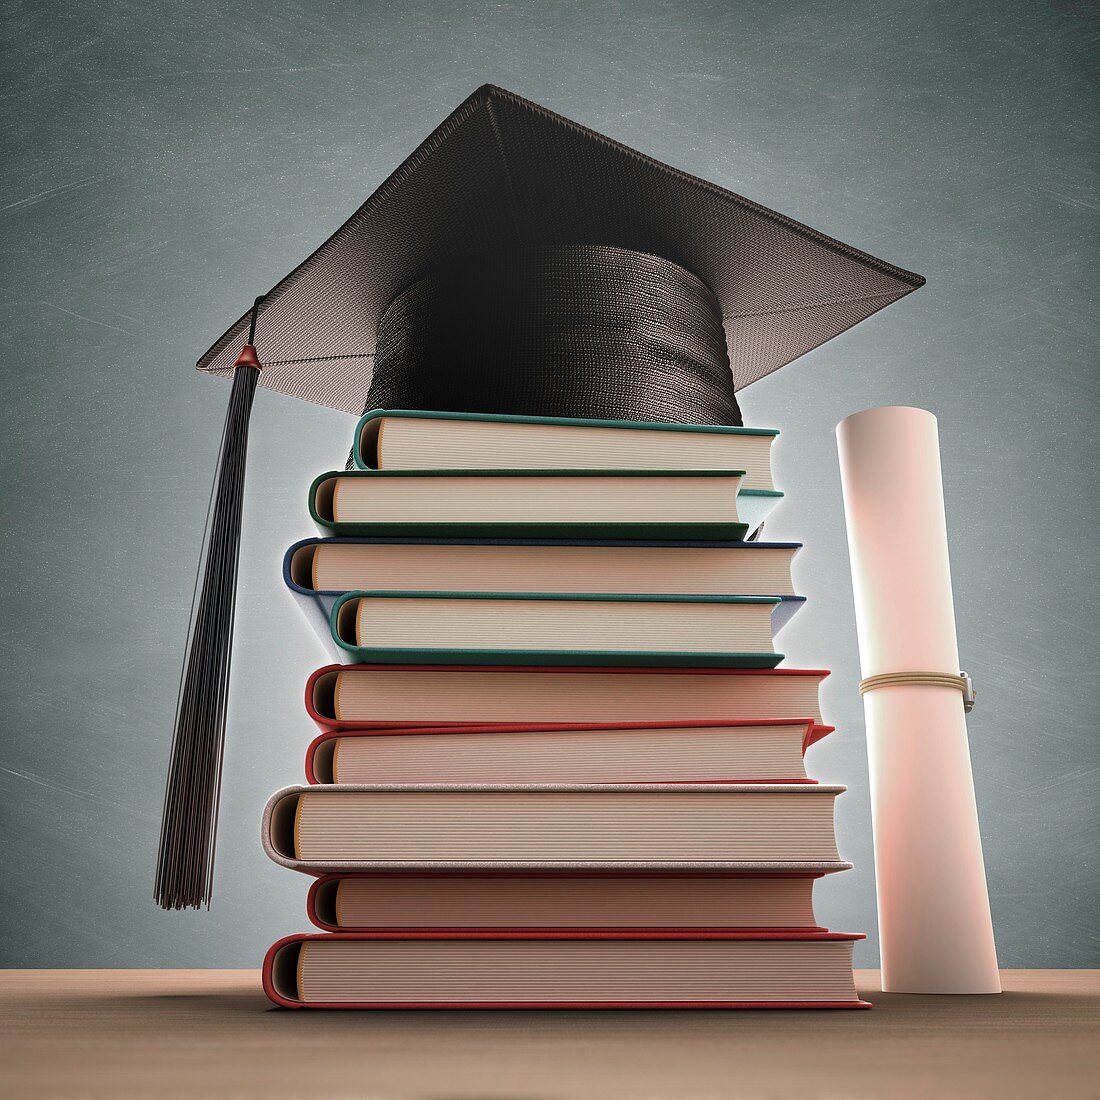 Mortar board on a stack of books,artwork